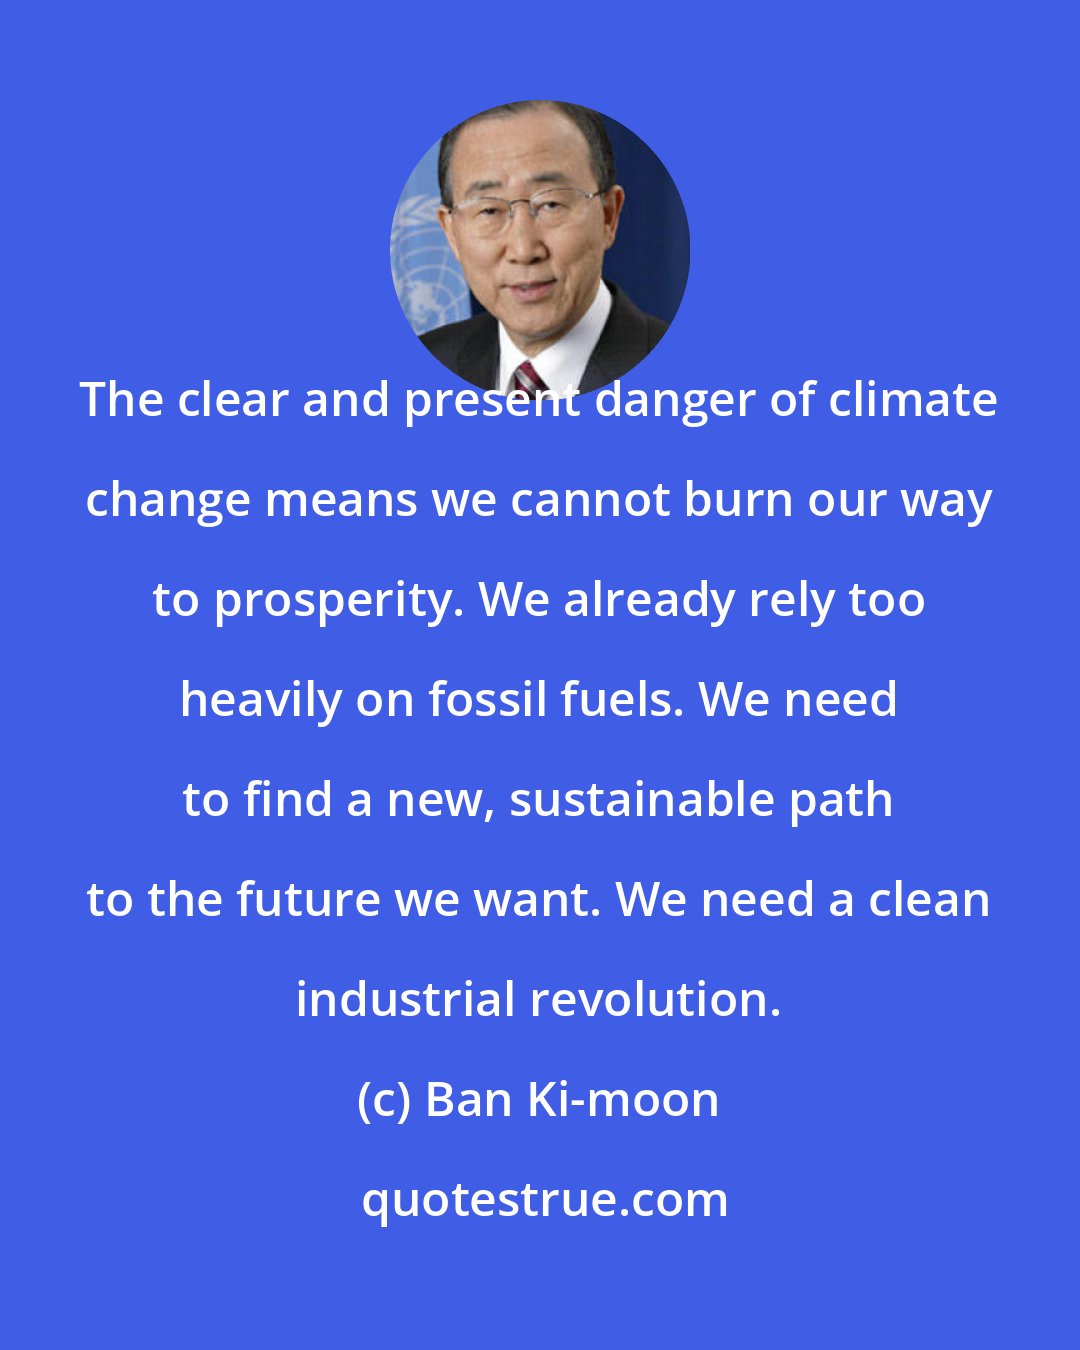 Ban Ki-moon: The clear and present danger of climate change means we cannot burn our way to prosperity. We already rely too heavily on fossil fuels. We need to find a new, sustainable path to the future we want. We need a clean industrial revolution.